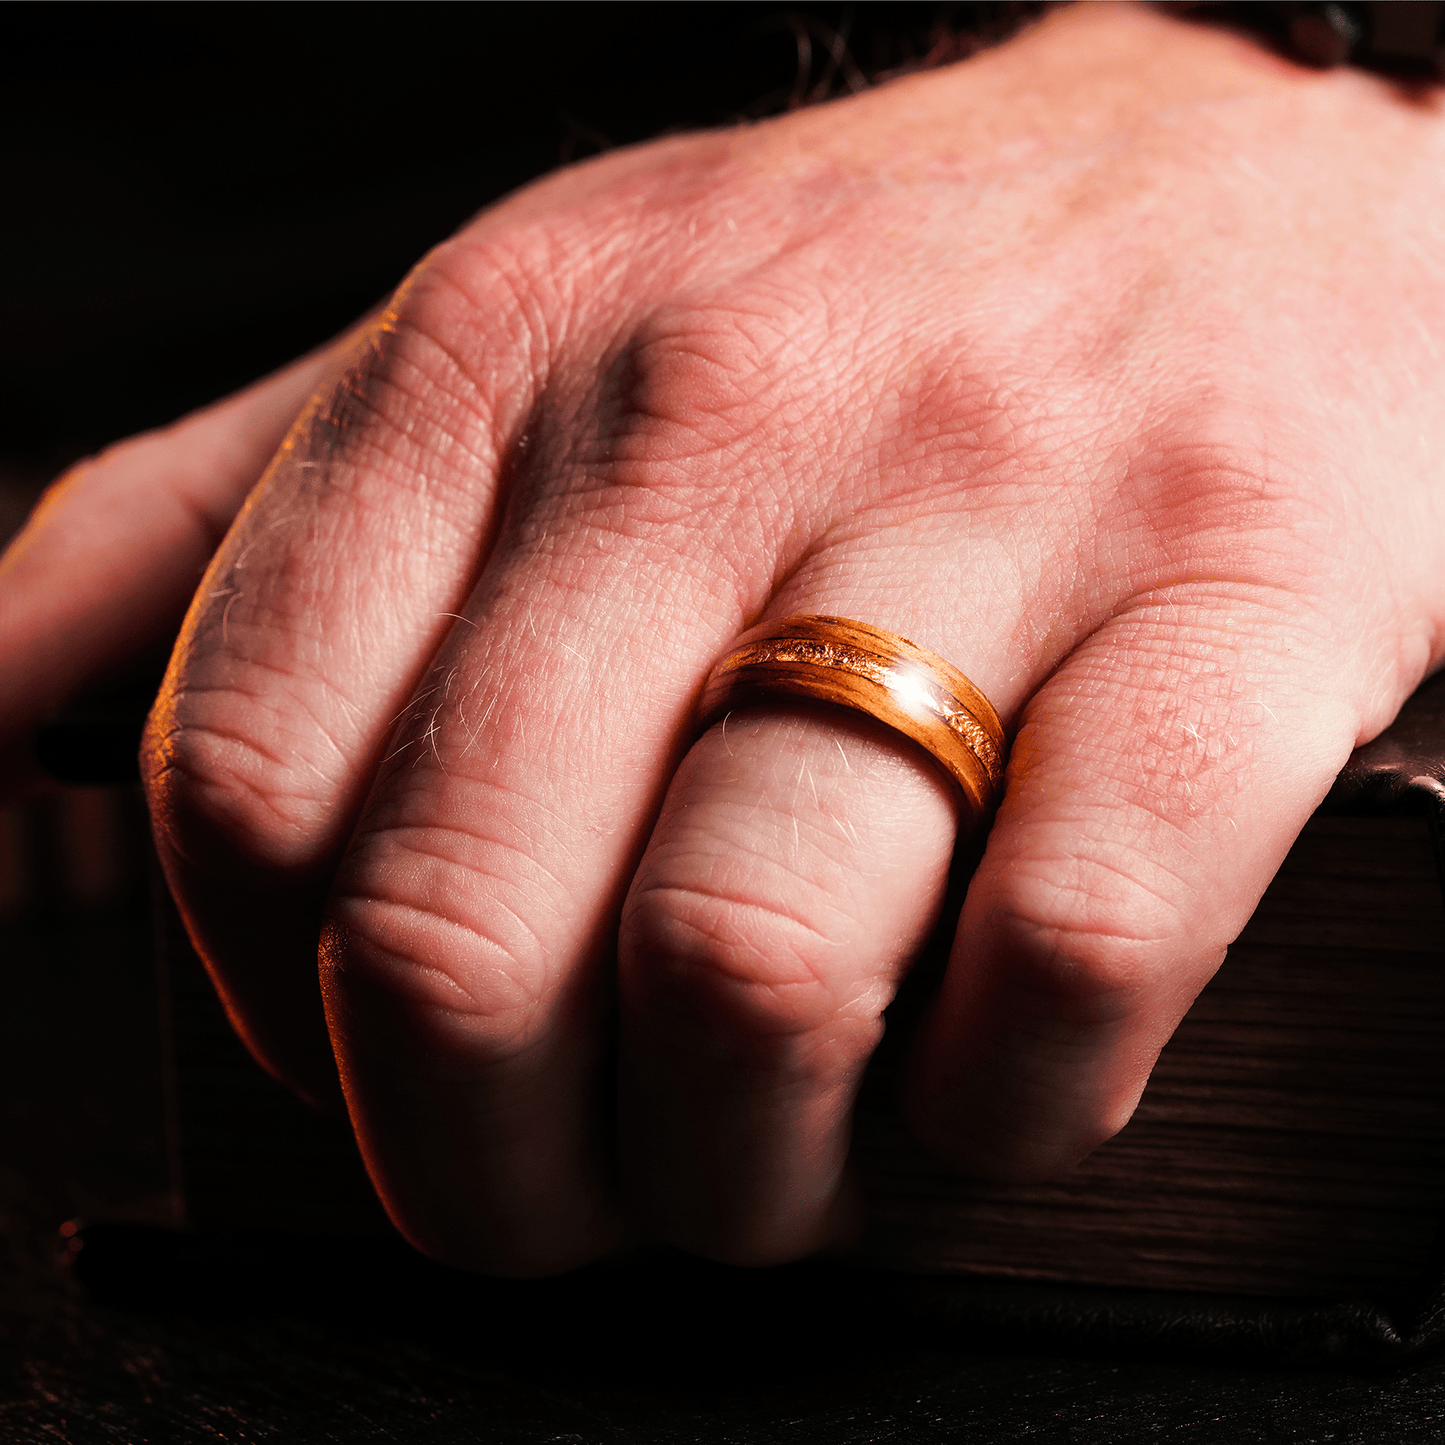 The Erikson - Men's Wedding Rings - Manly Bands